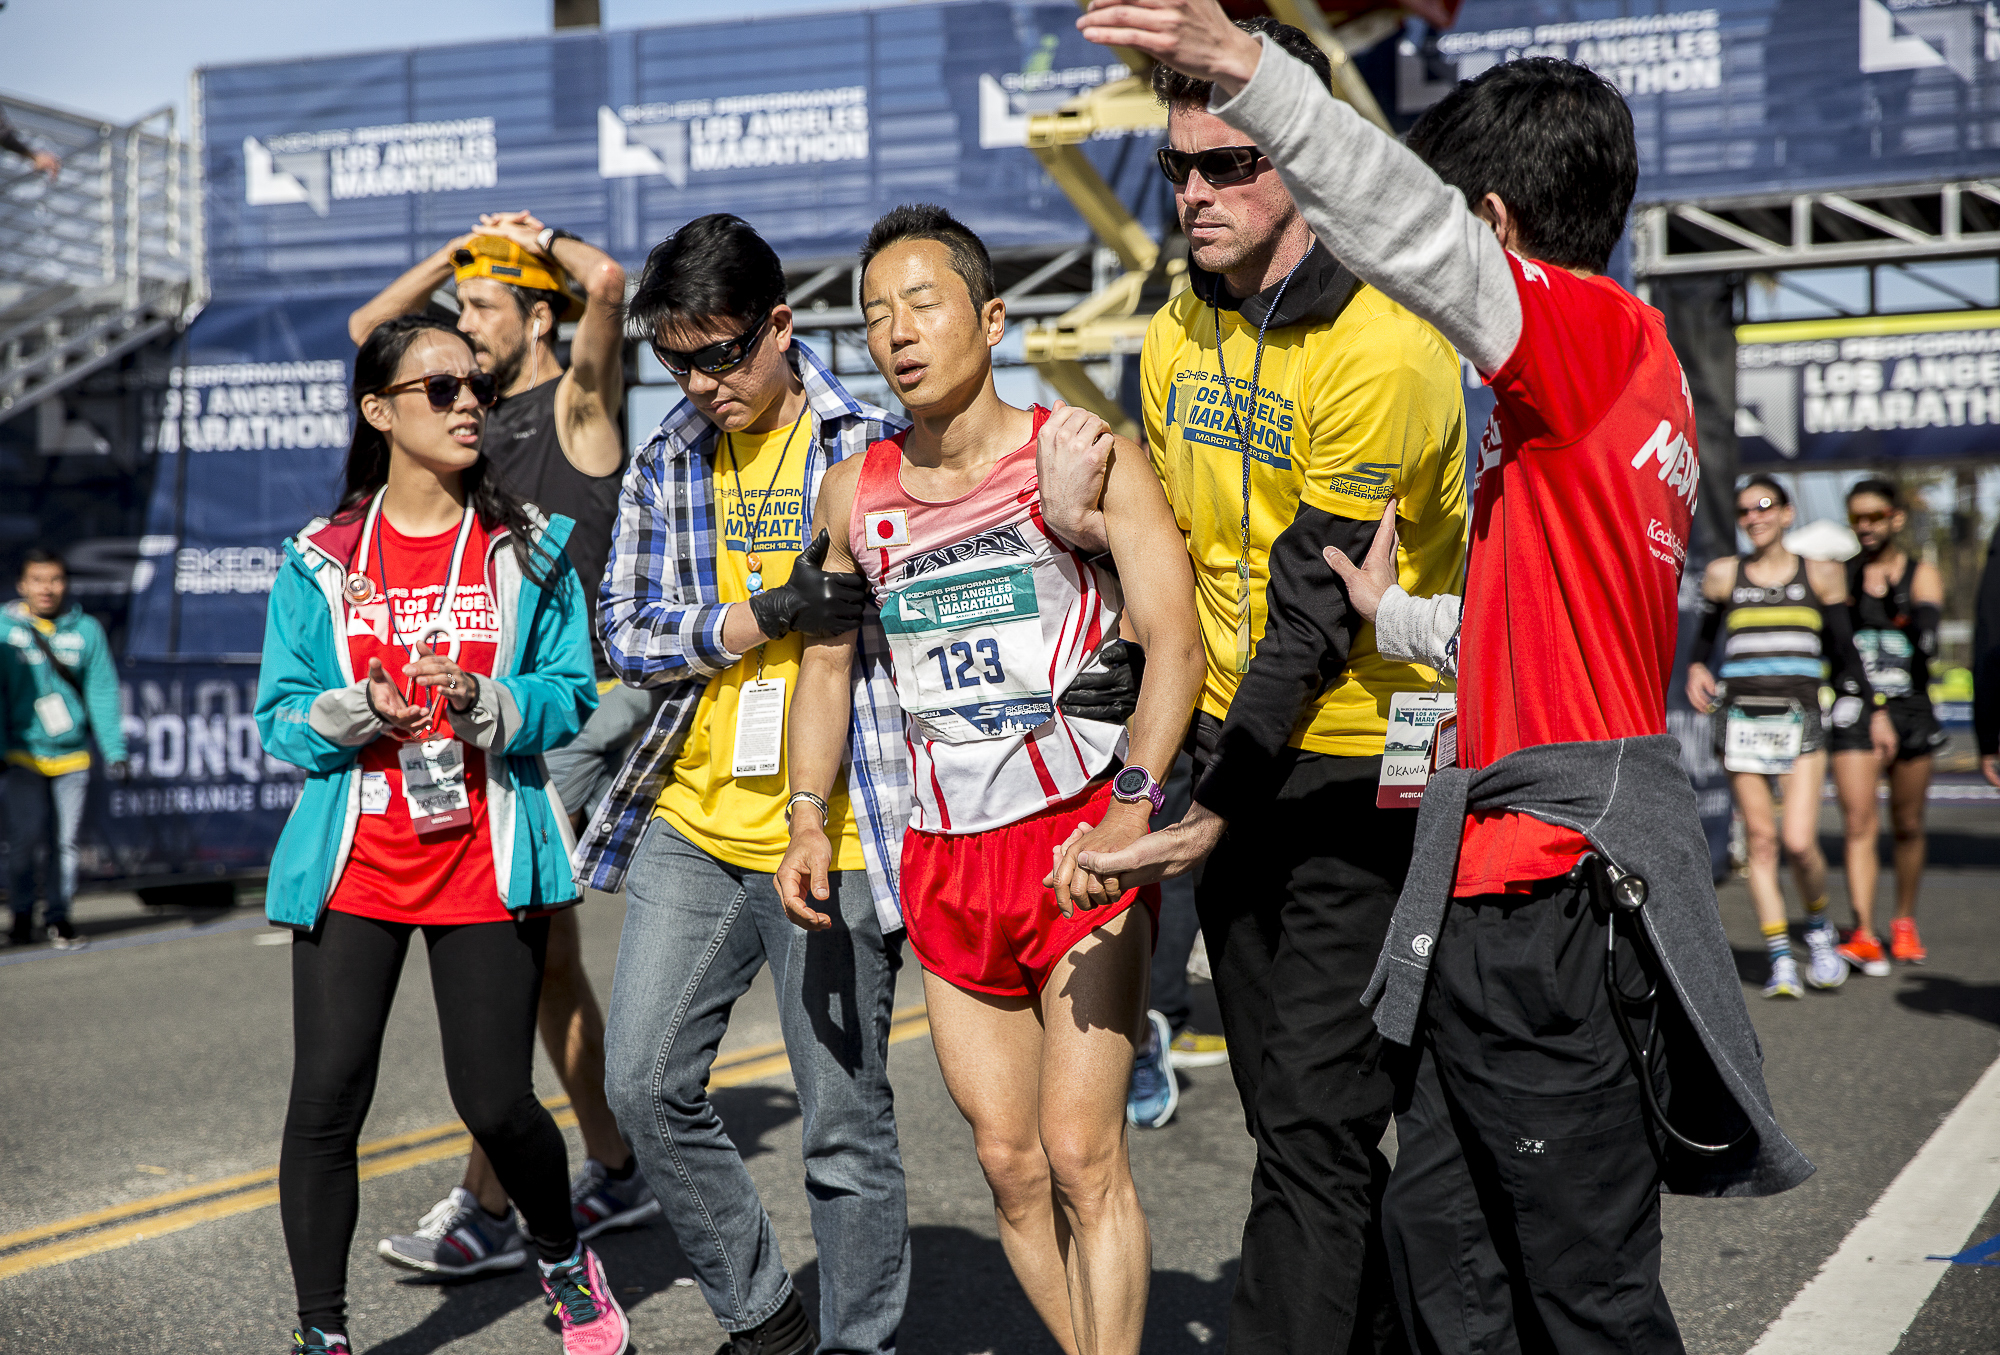  Koji Kawamoto (bib #123) receives help from “Hotwalkers” after finishing the 2018 Los Angeles Marathon with a total race time of 3:11:40 on March 18, 2018 in Santa Monica, California. “Hotwalkers” are Los Angeles Marathon volunteers who escort runne